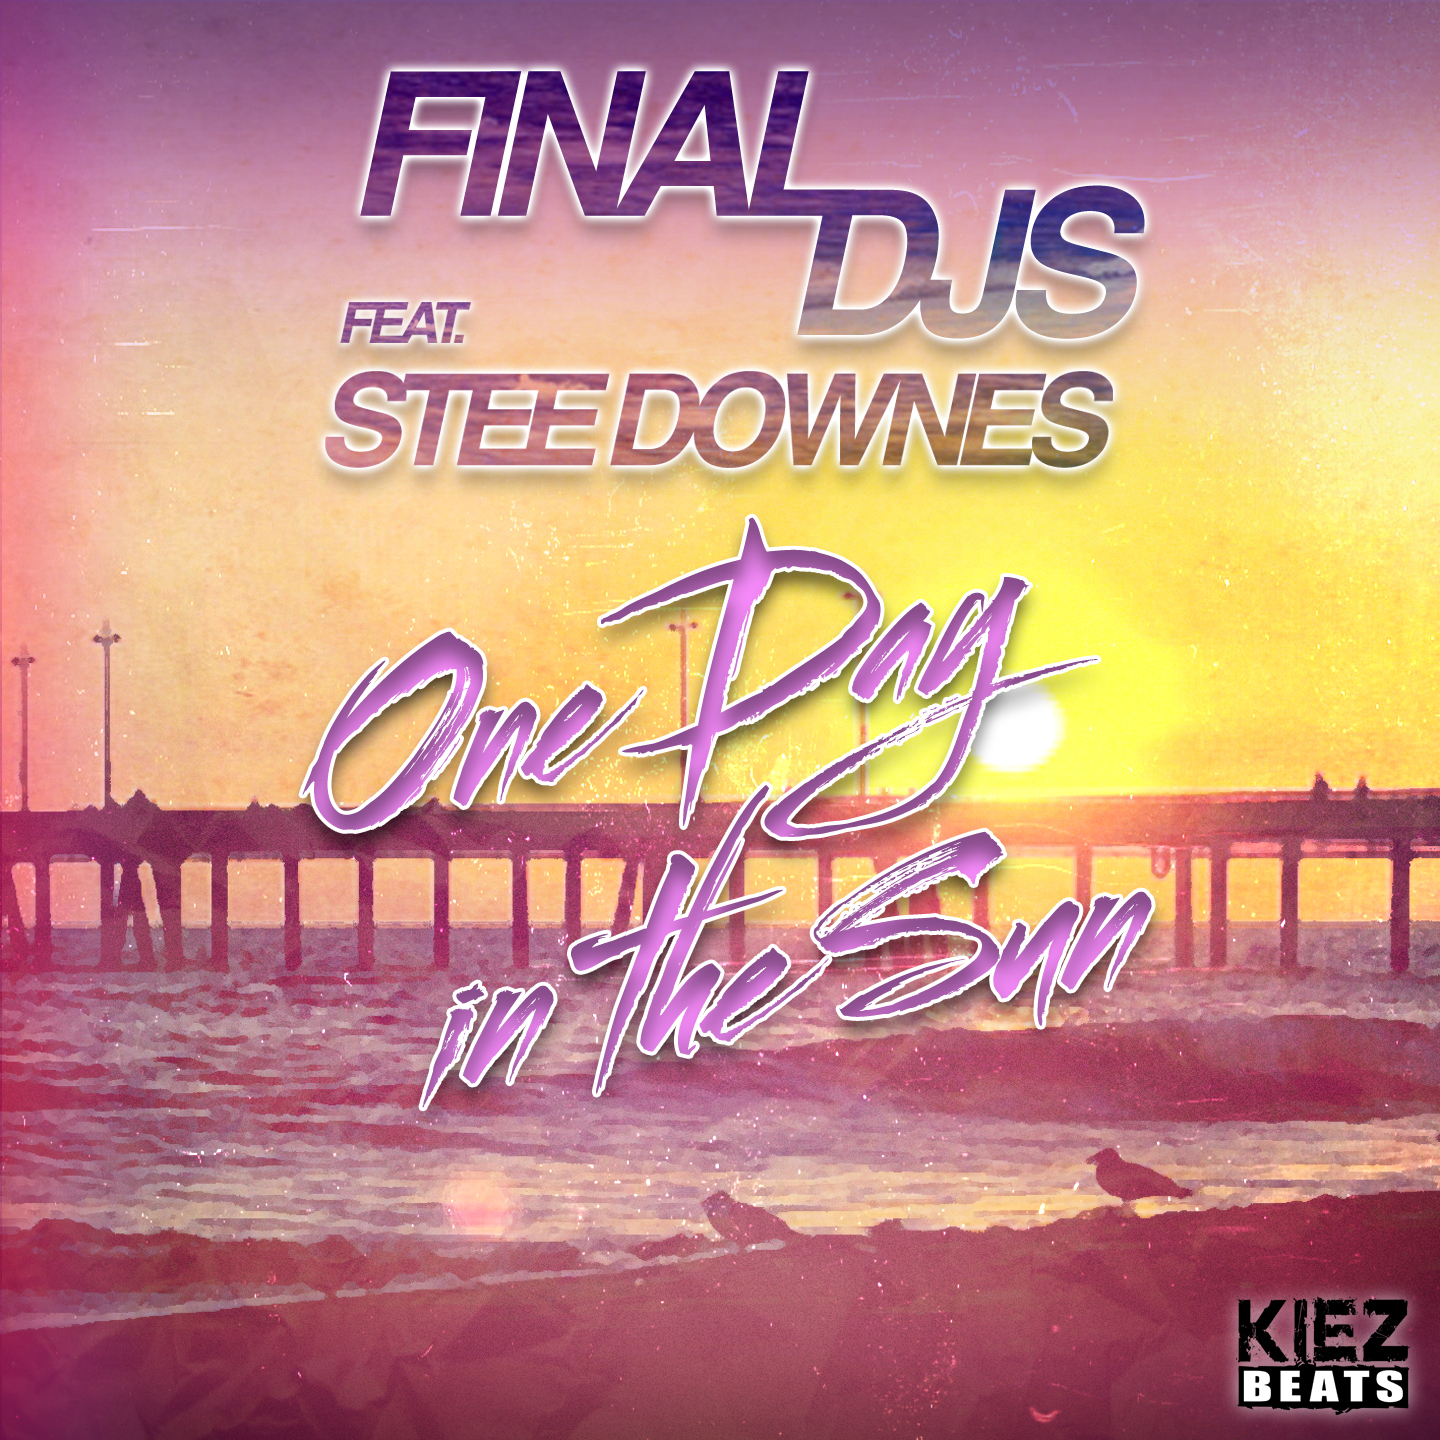 Final DJs - One Day in the Sun cover